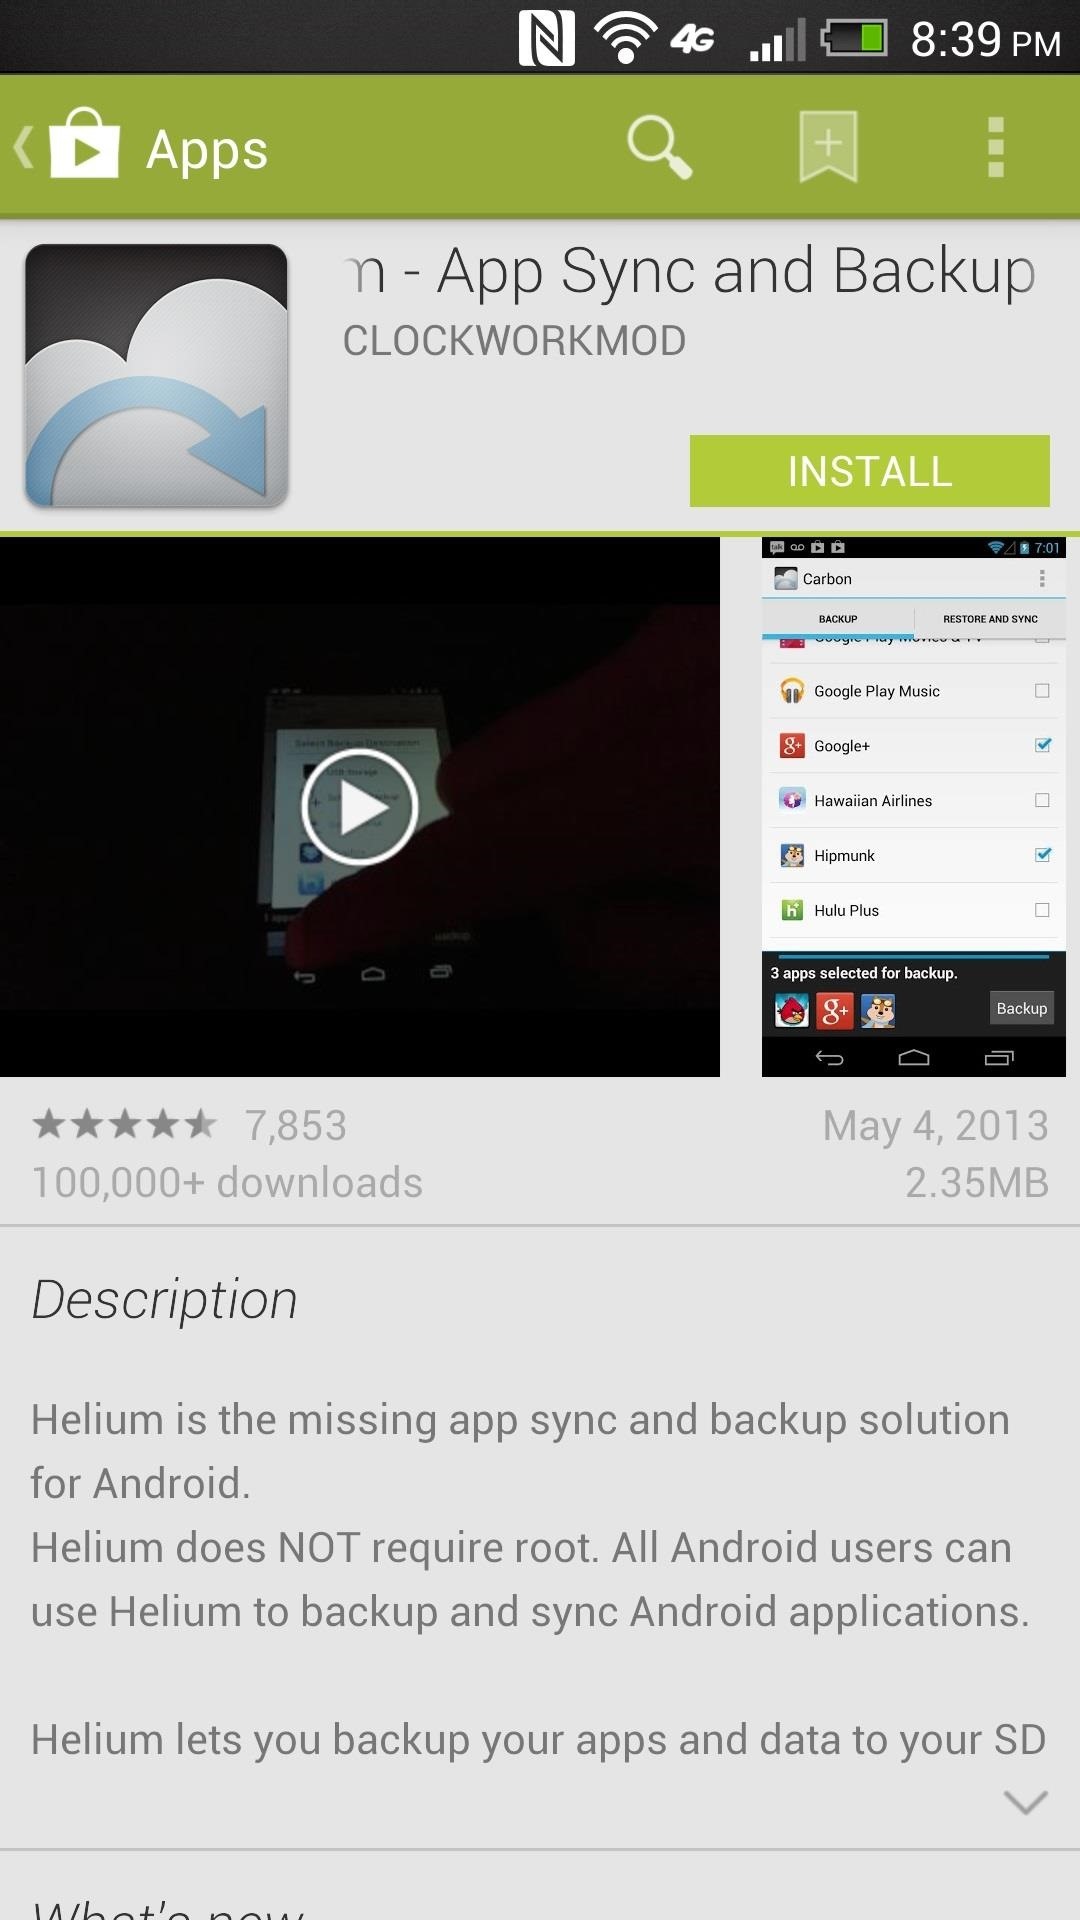 How to Completely Back Up Your Apps & App Data on Your HTC One or Other Android Device